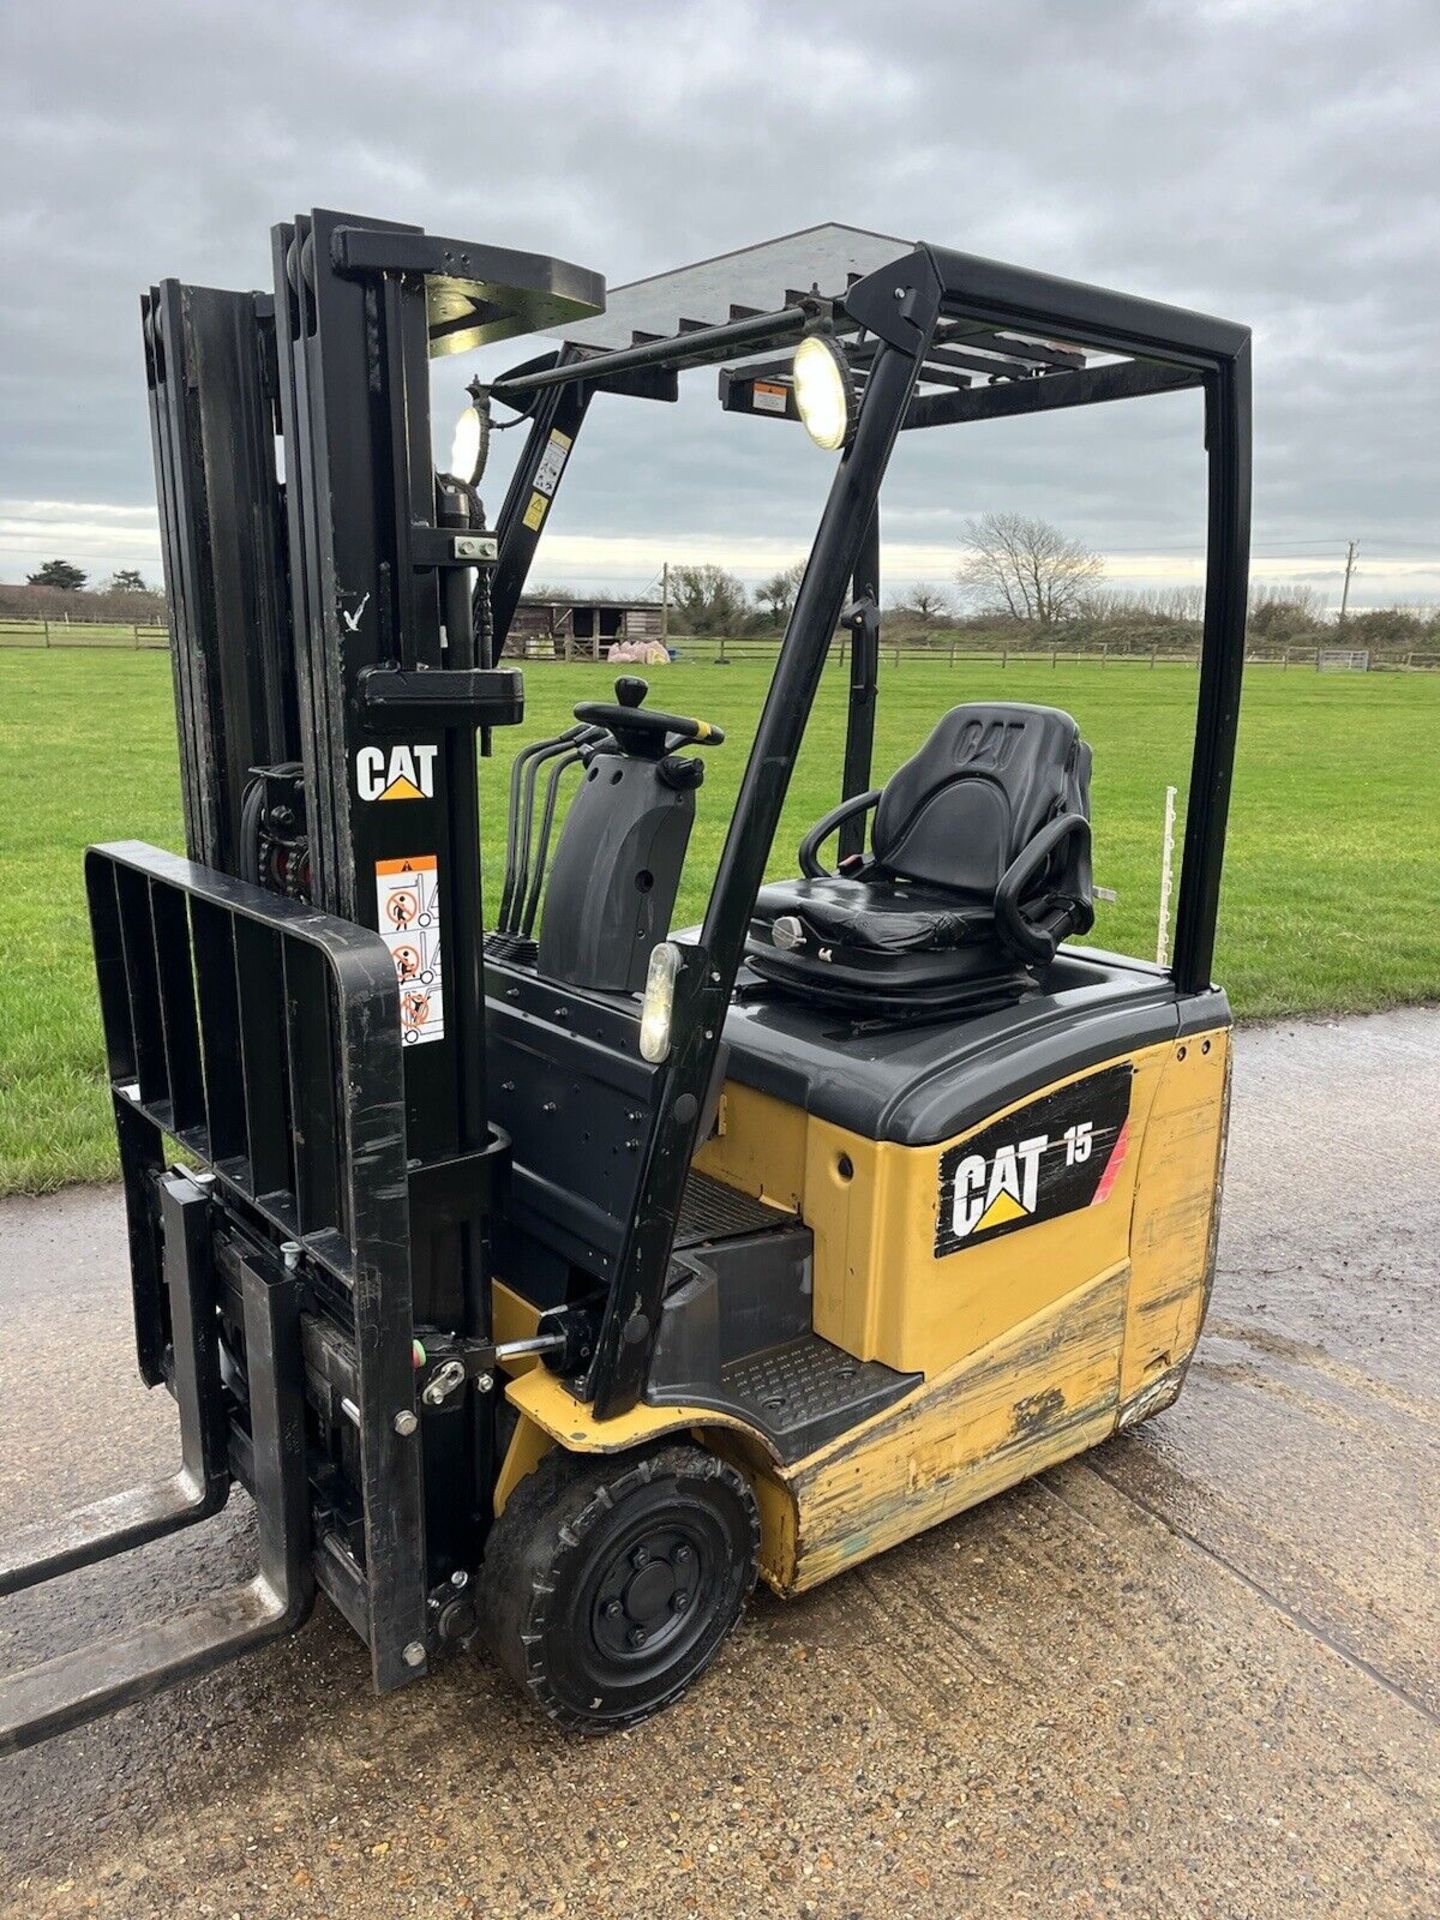 2017, CATERPILLAR 1.5 Electric Forklift Truck (Container Spec)